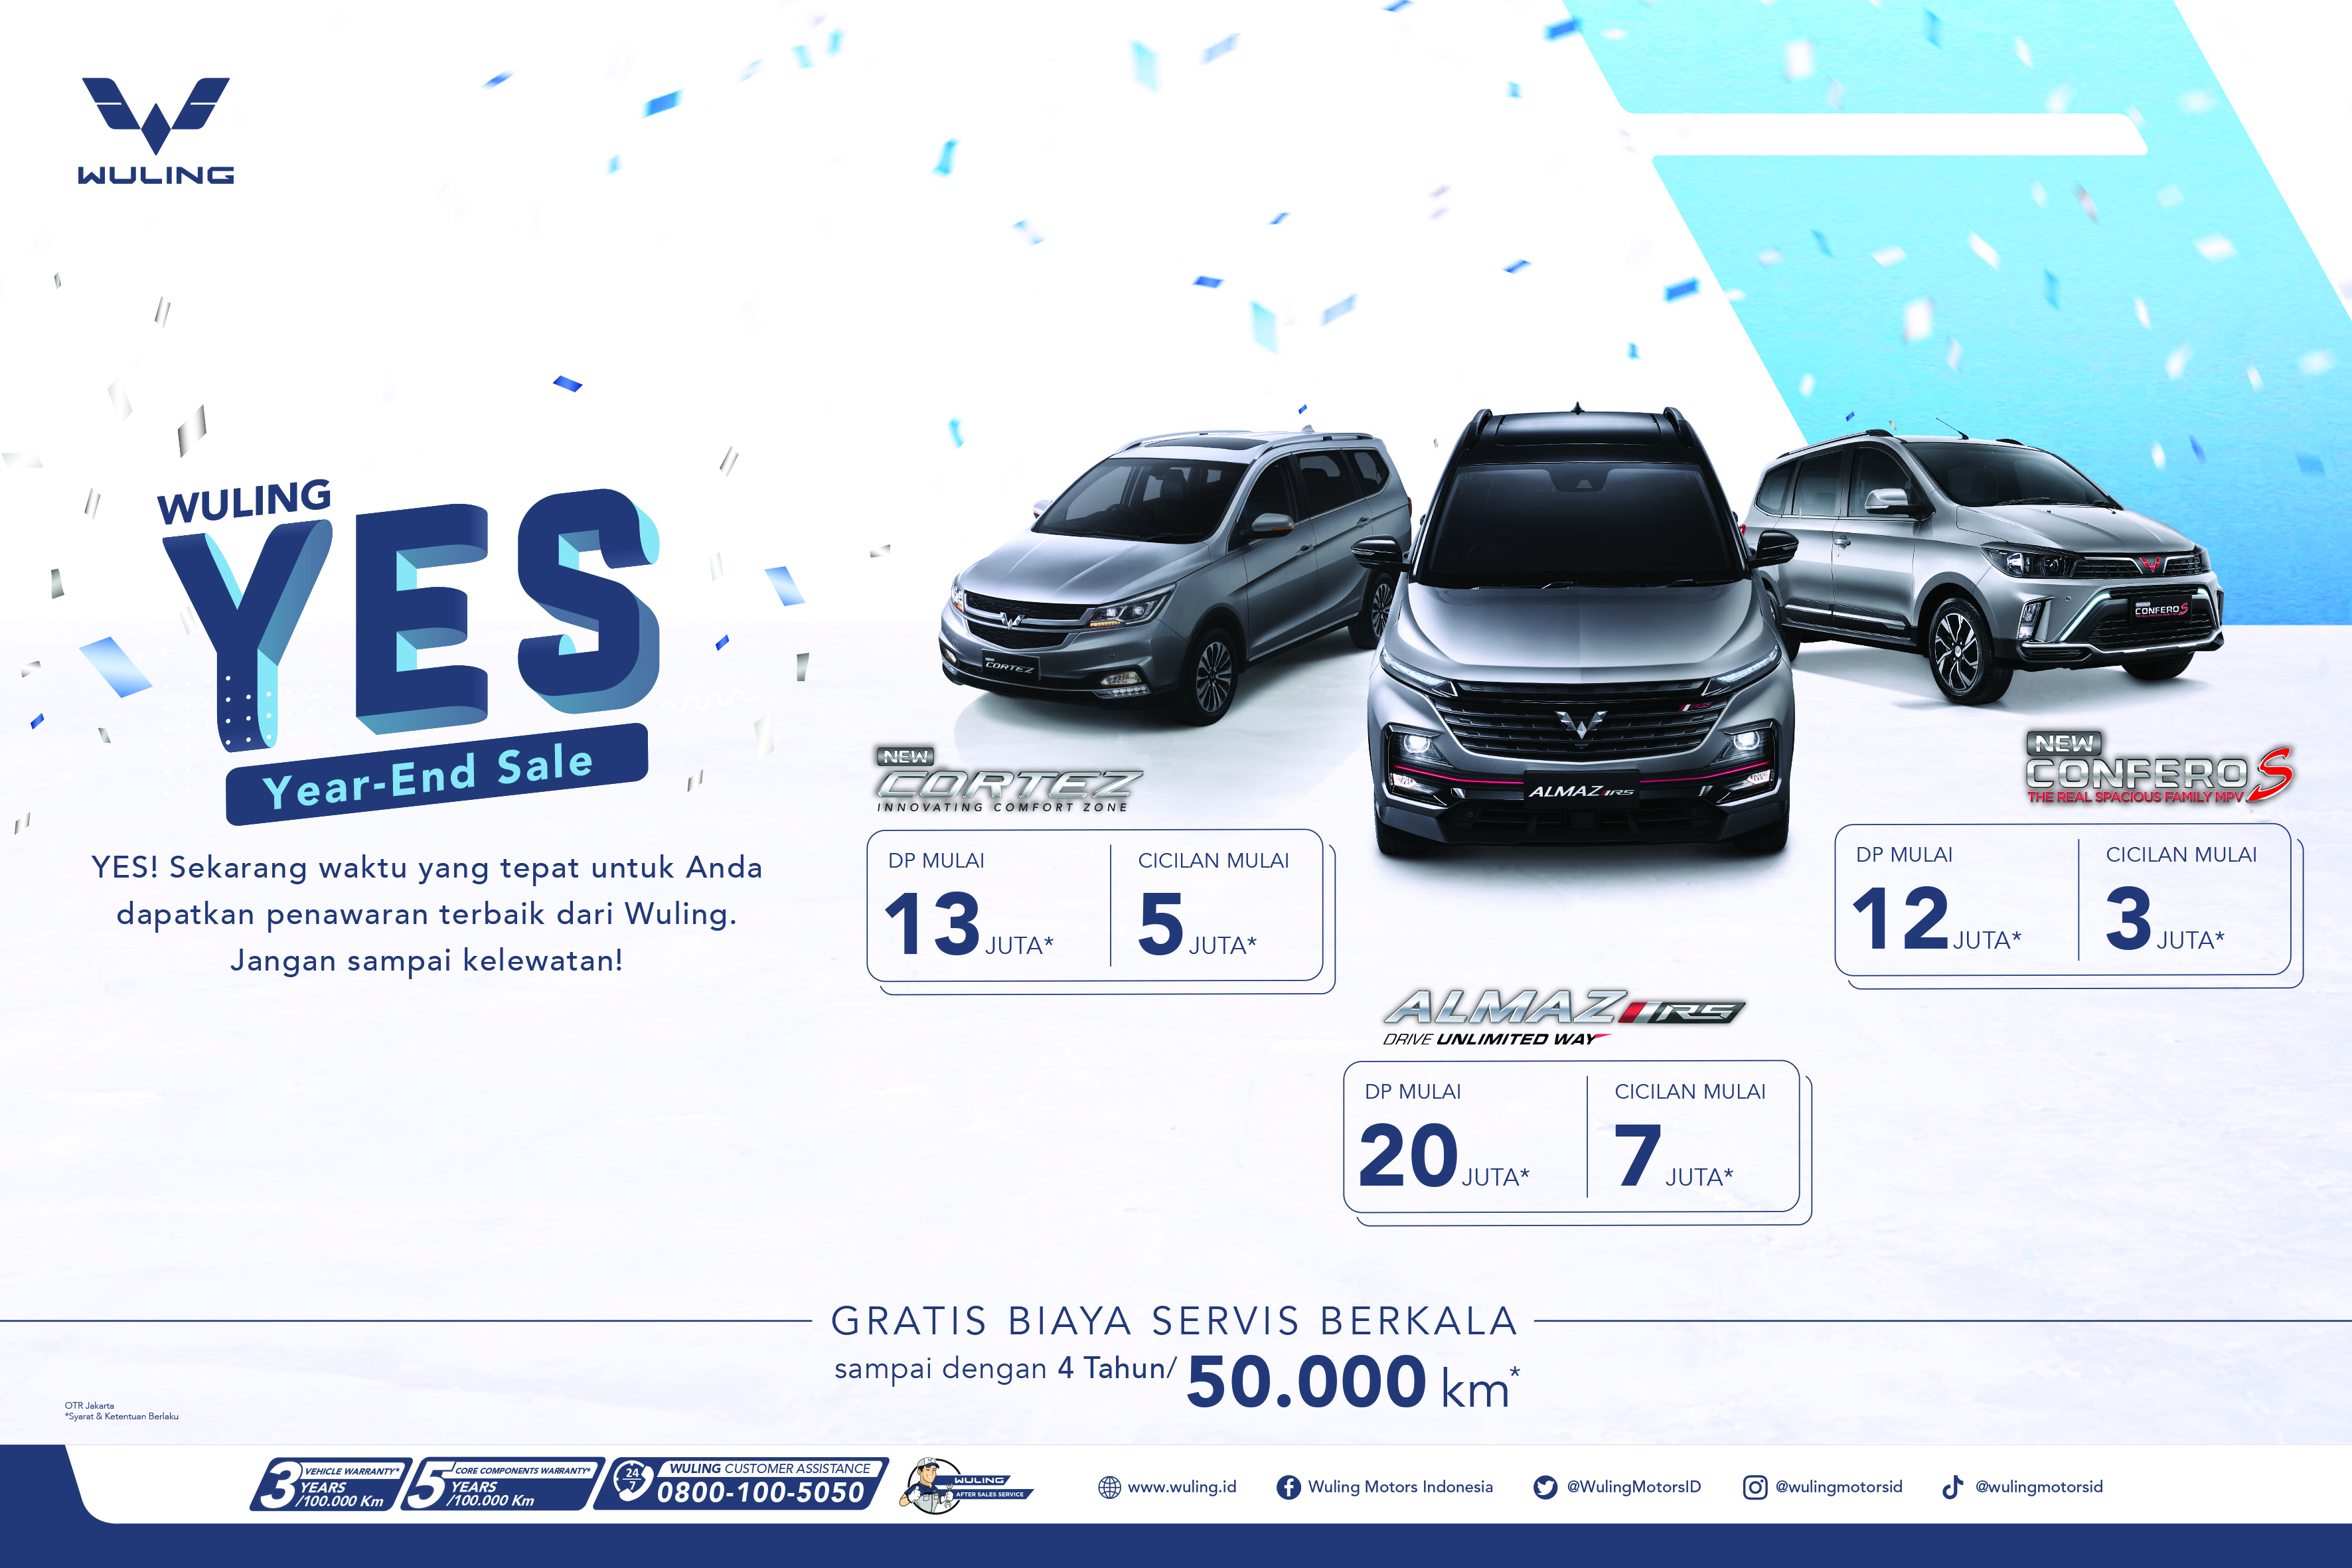 Image Wuling Holds Special Year End Sale (YES) Promo Throughout the End of This Year